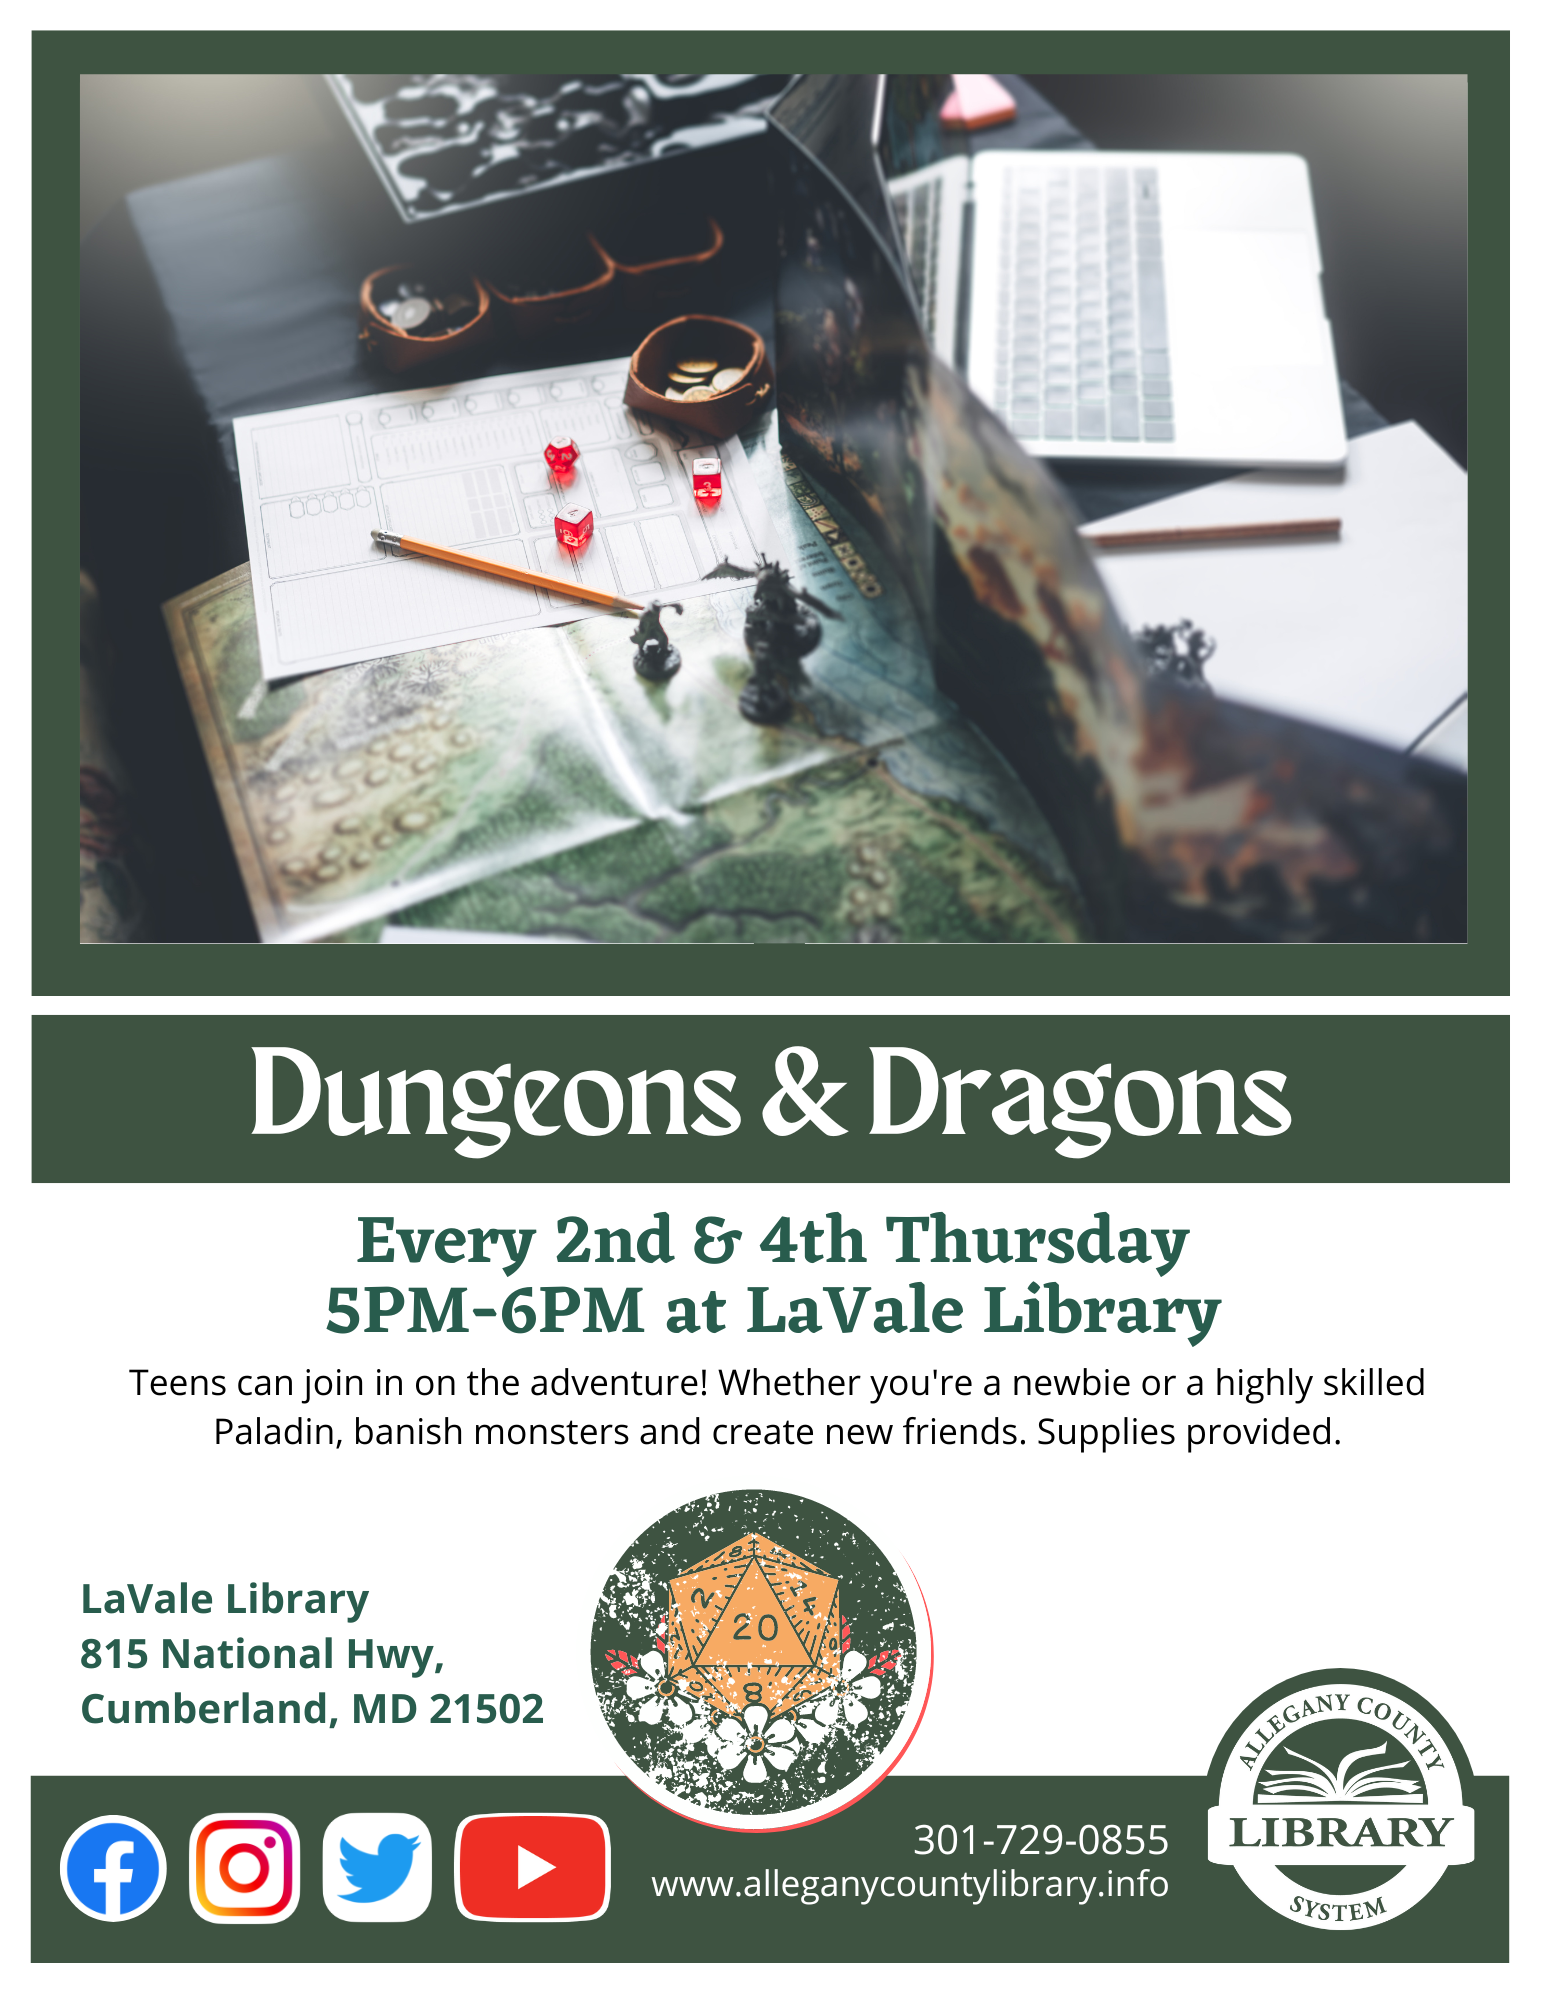 dungeons and dragons teen event details